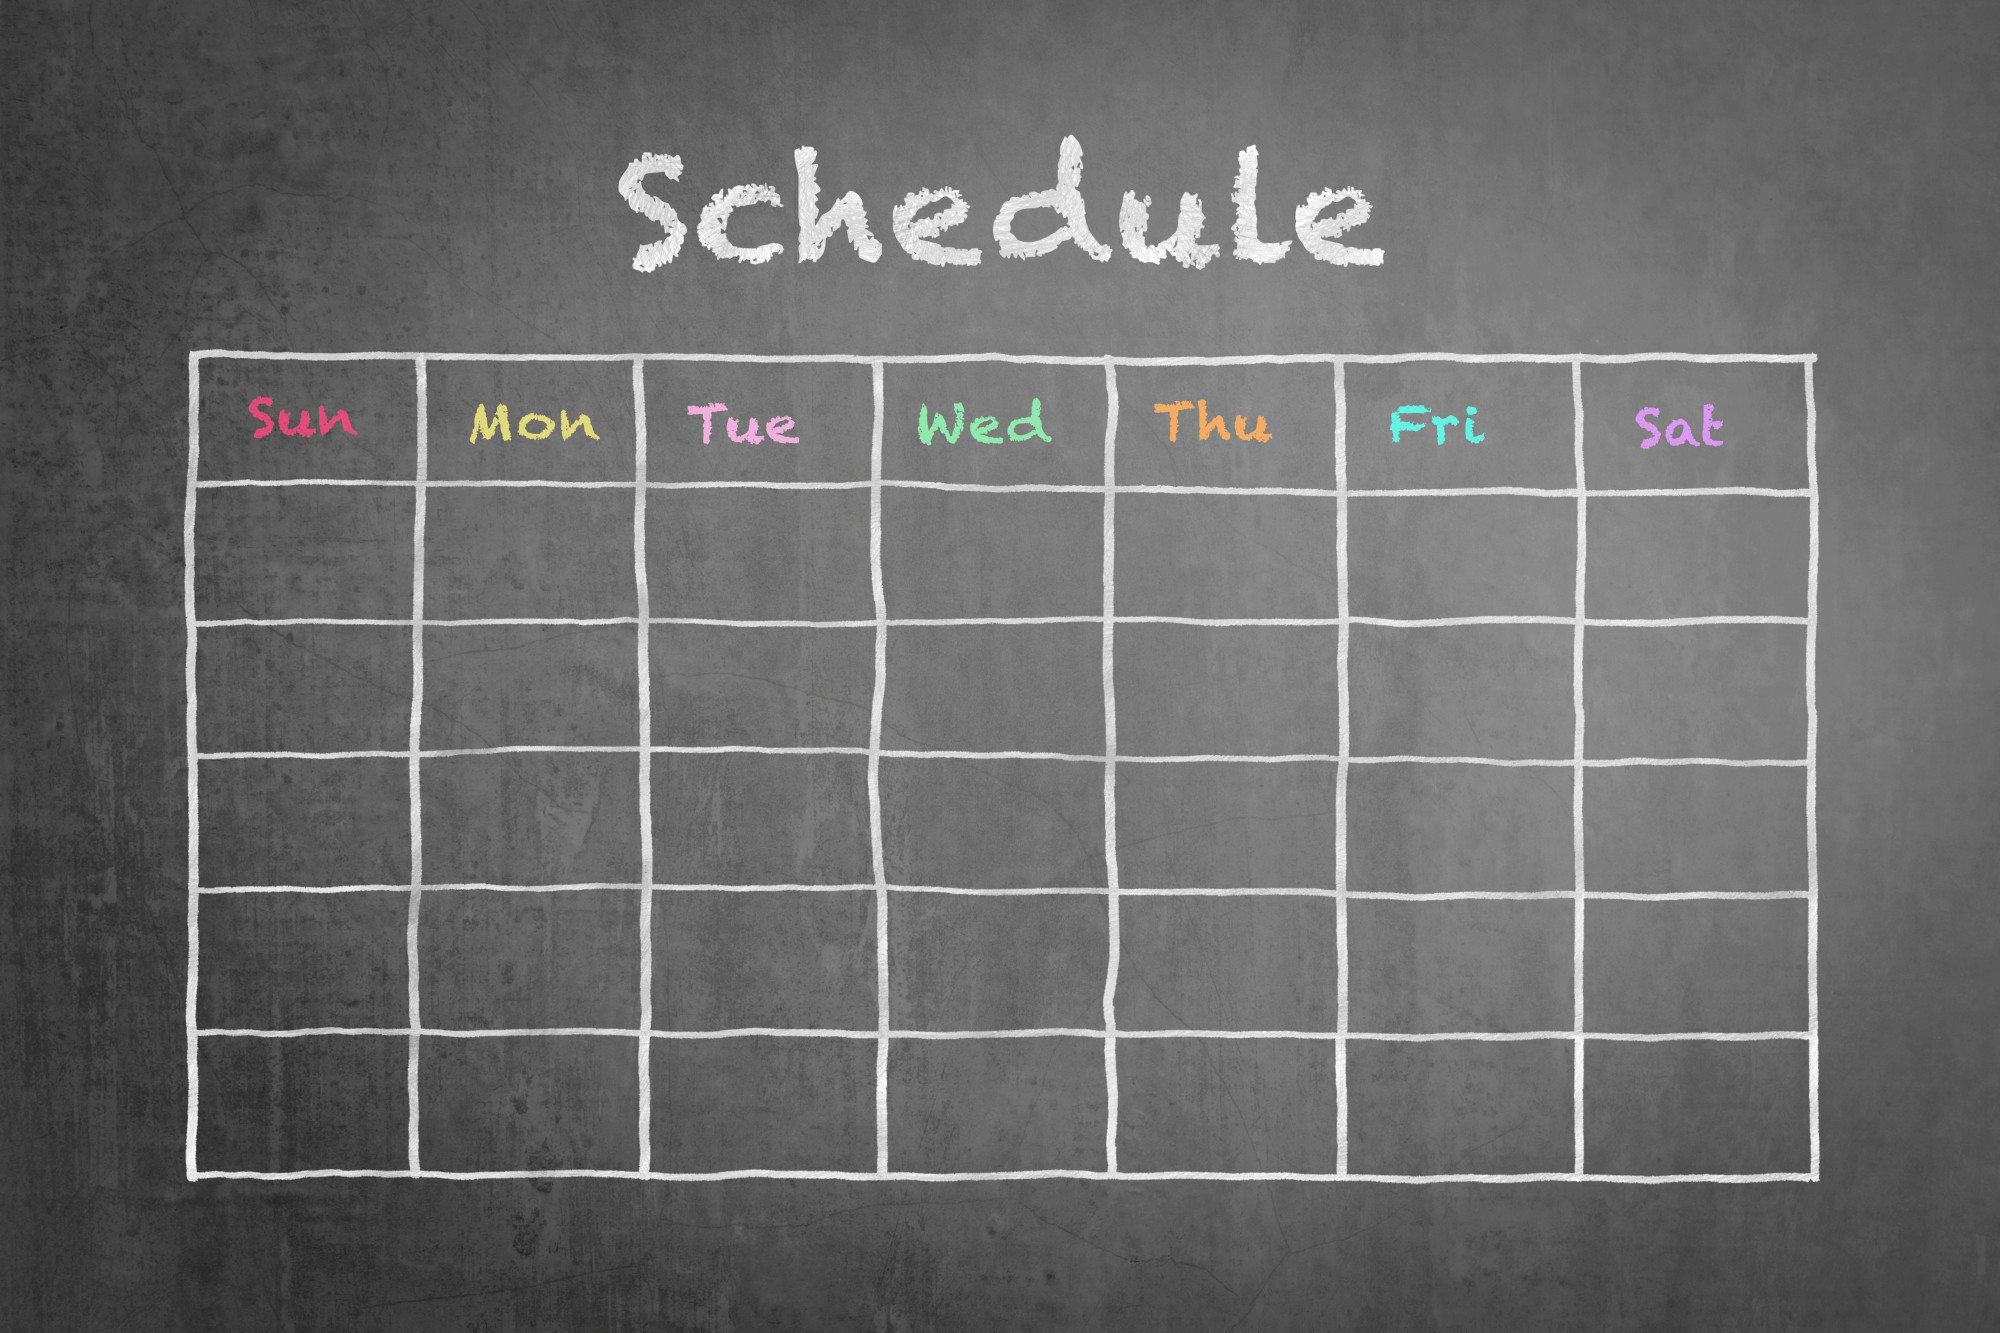 Creating a House Cleaning Schedule to Keep Up With the Clutter